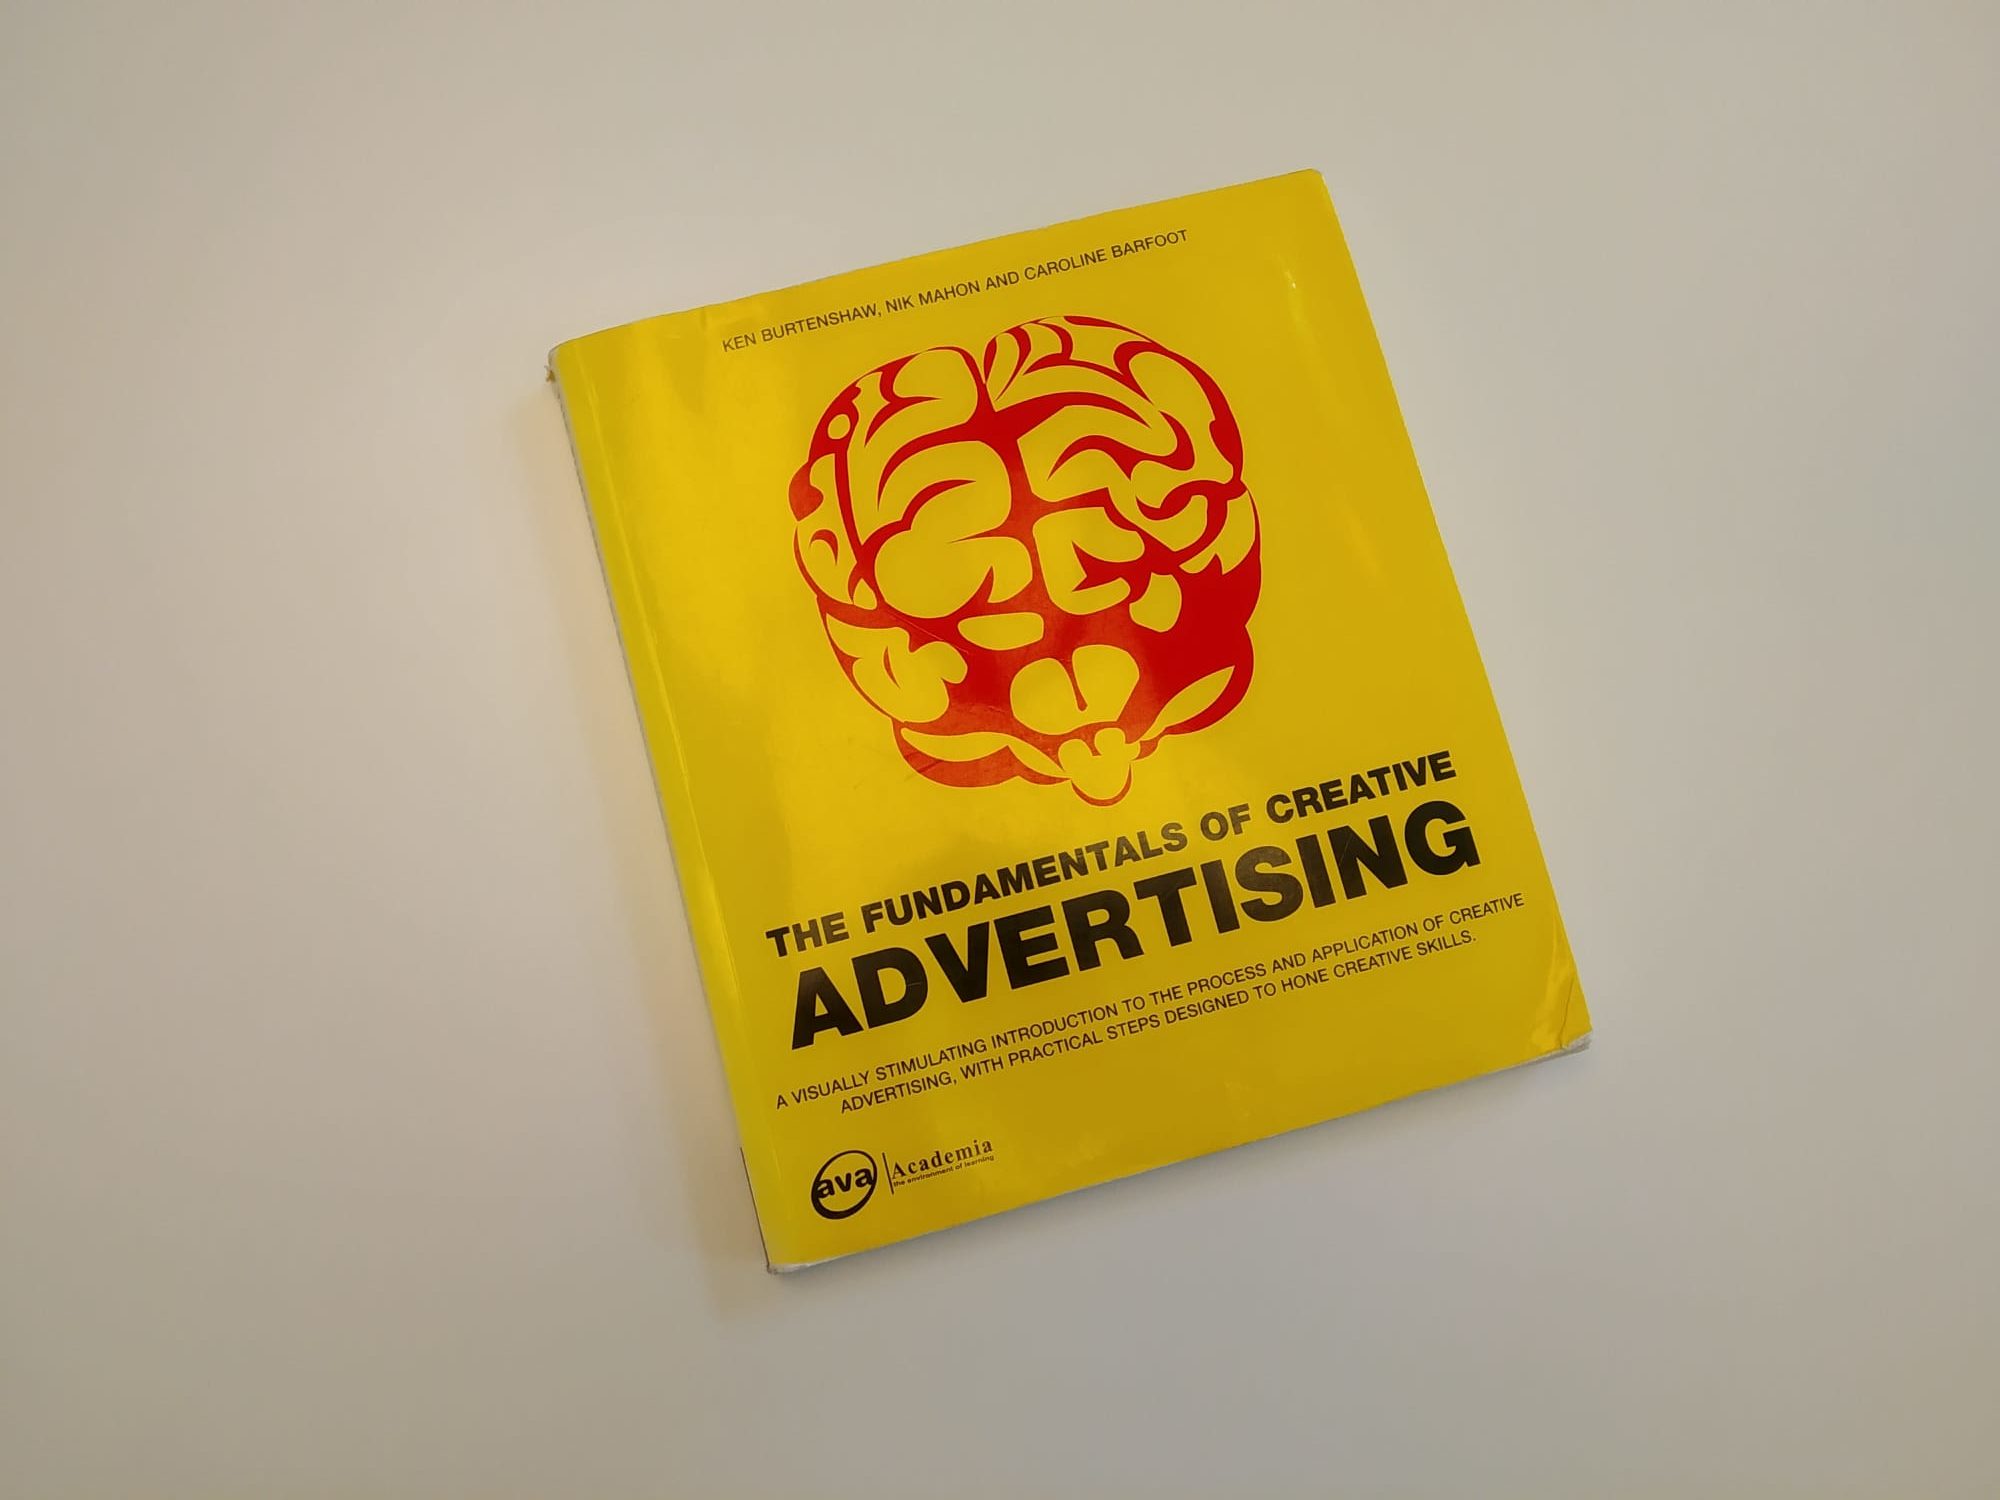 the fundamentals of creative advertising